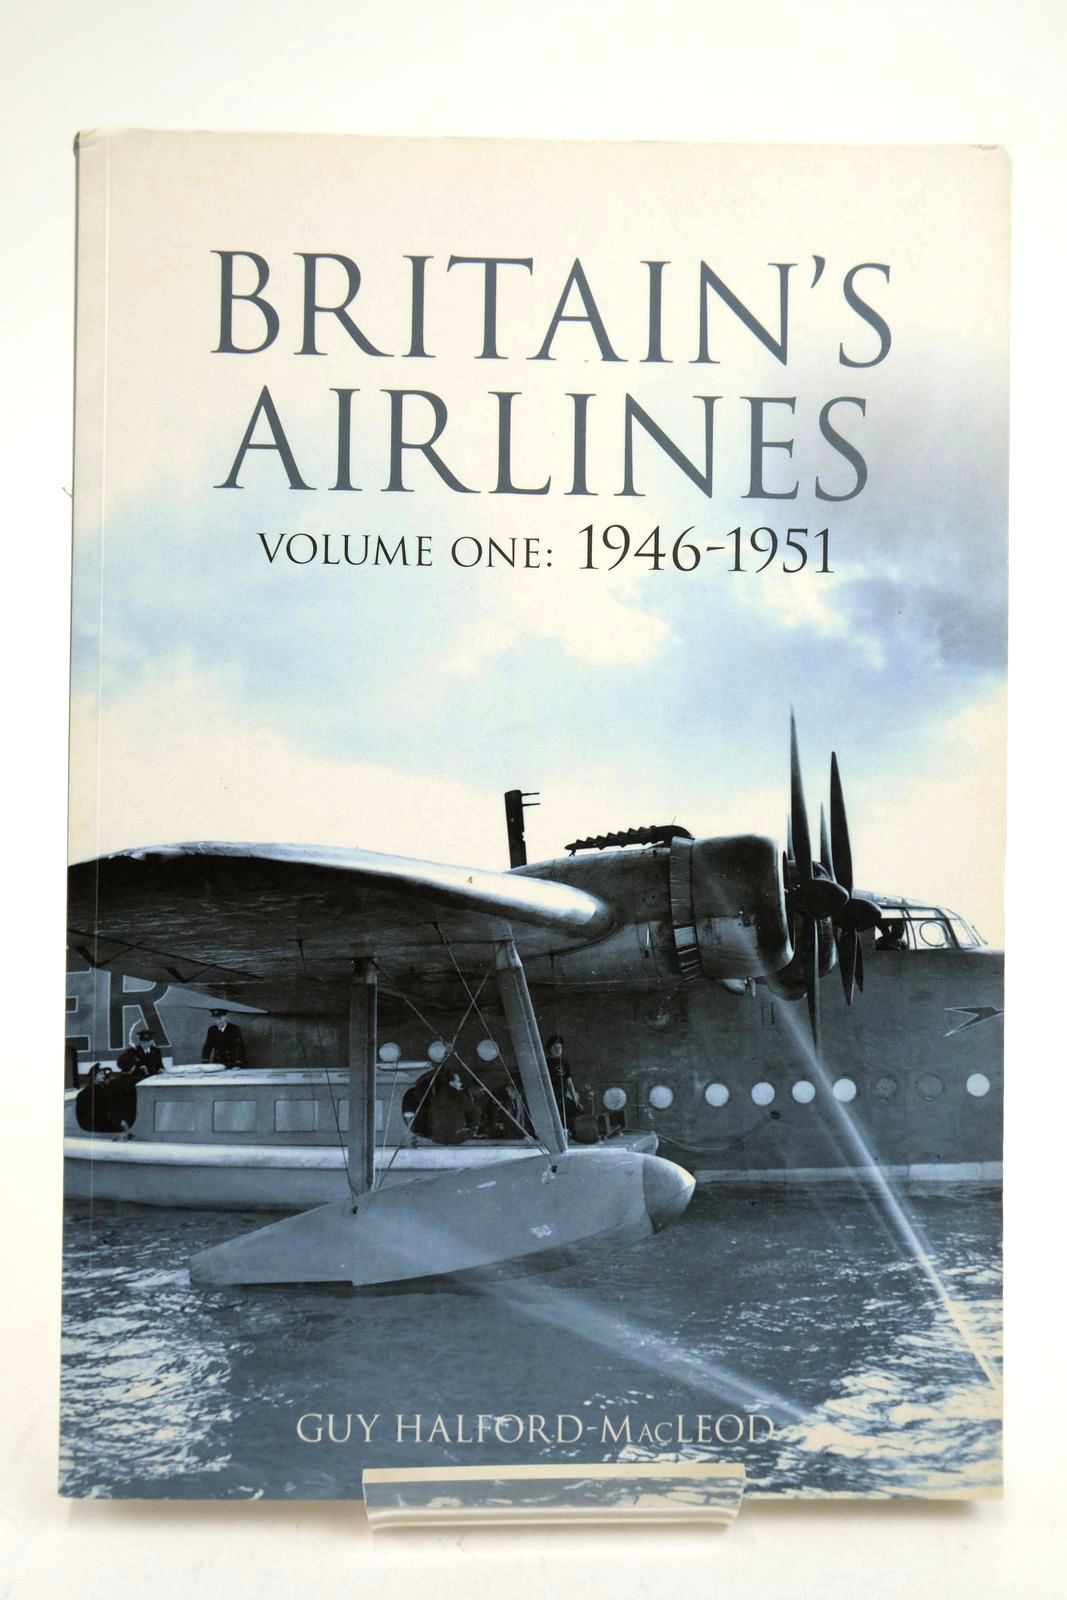 Photo of BRITAIN'S AIRLINES VOLUME ONE: 1946-1951 written by Halford-Macleod, Guy published by Tempus Publishing Ltd (STOCK CODE: 2139366)  for sale by Stella & Rose's Books